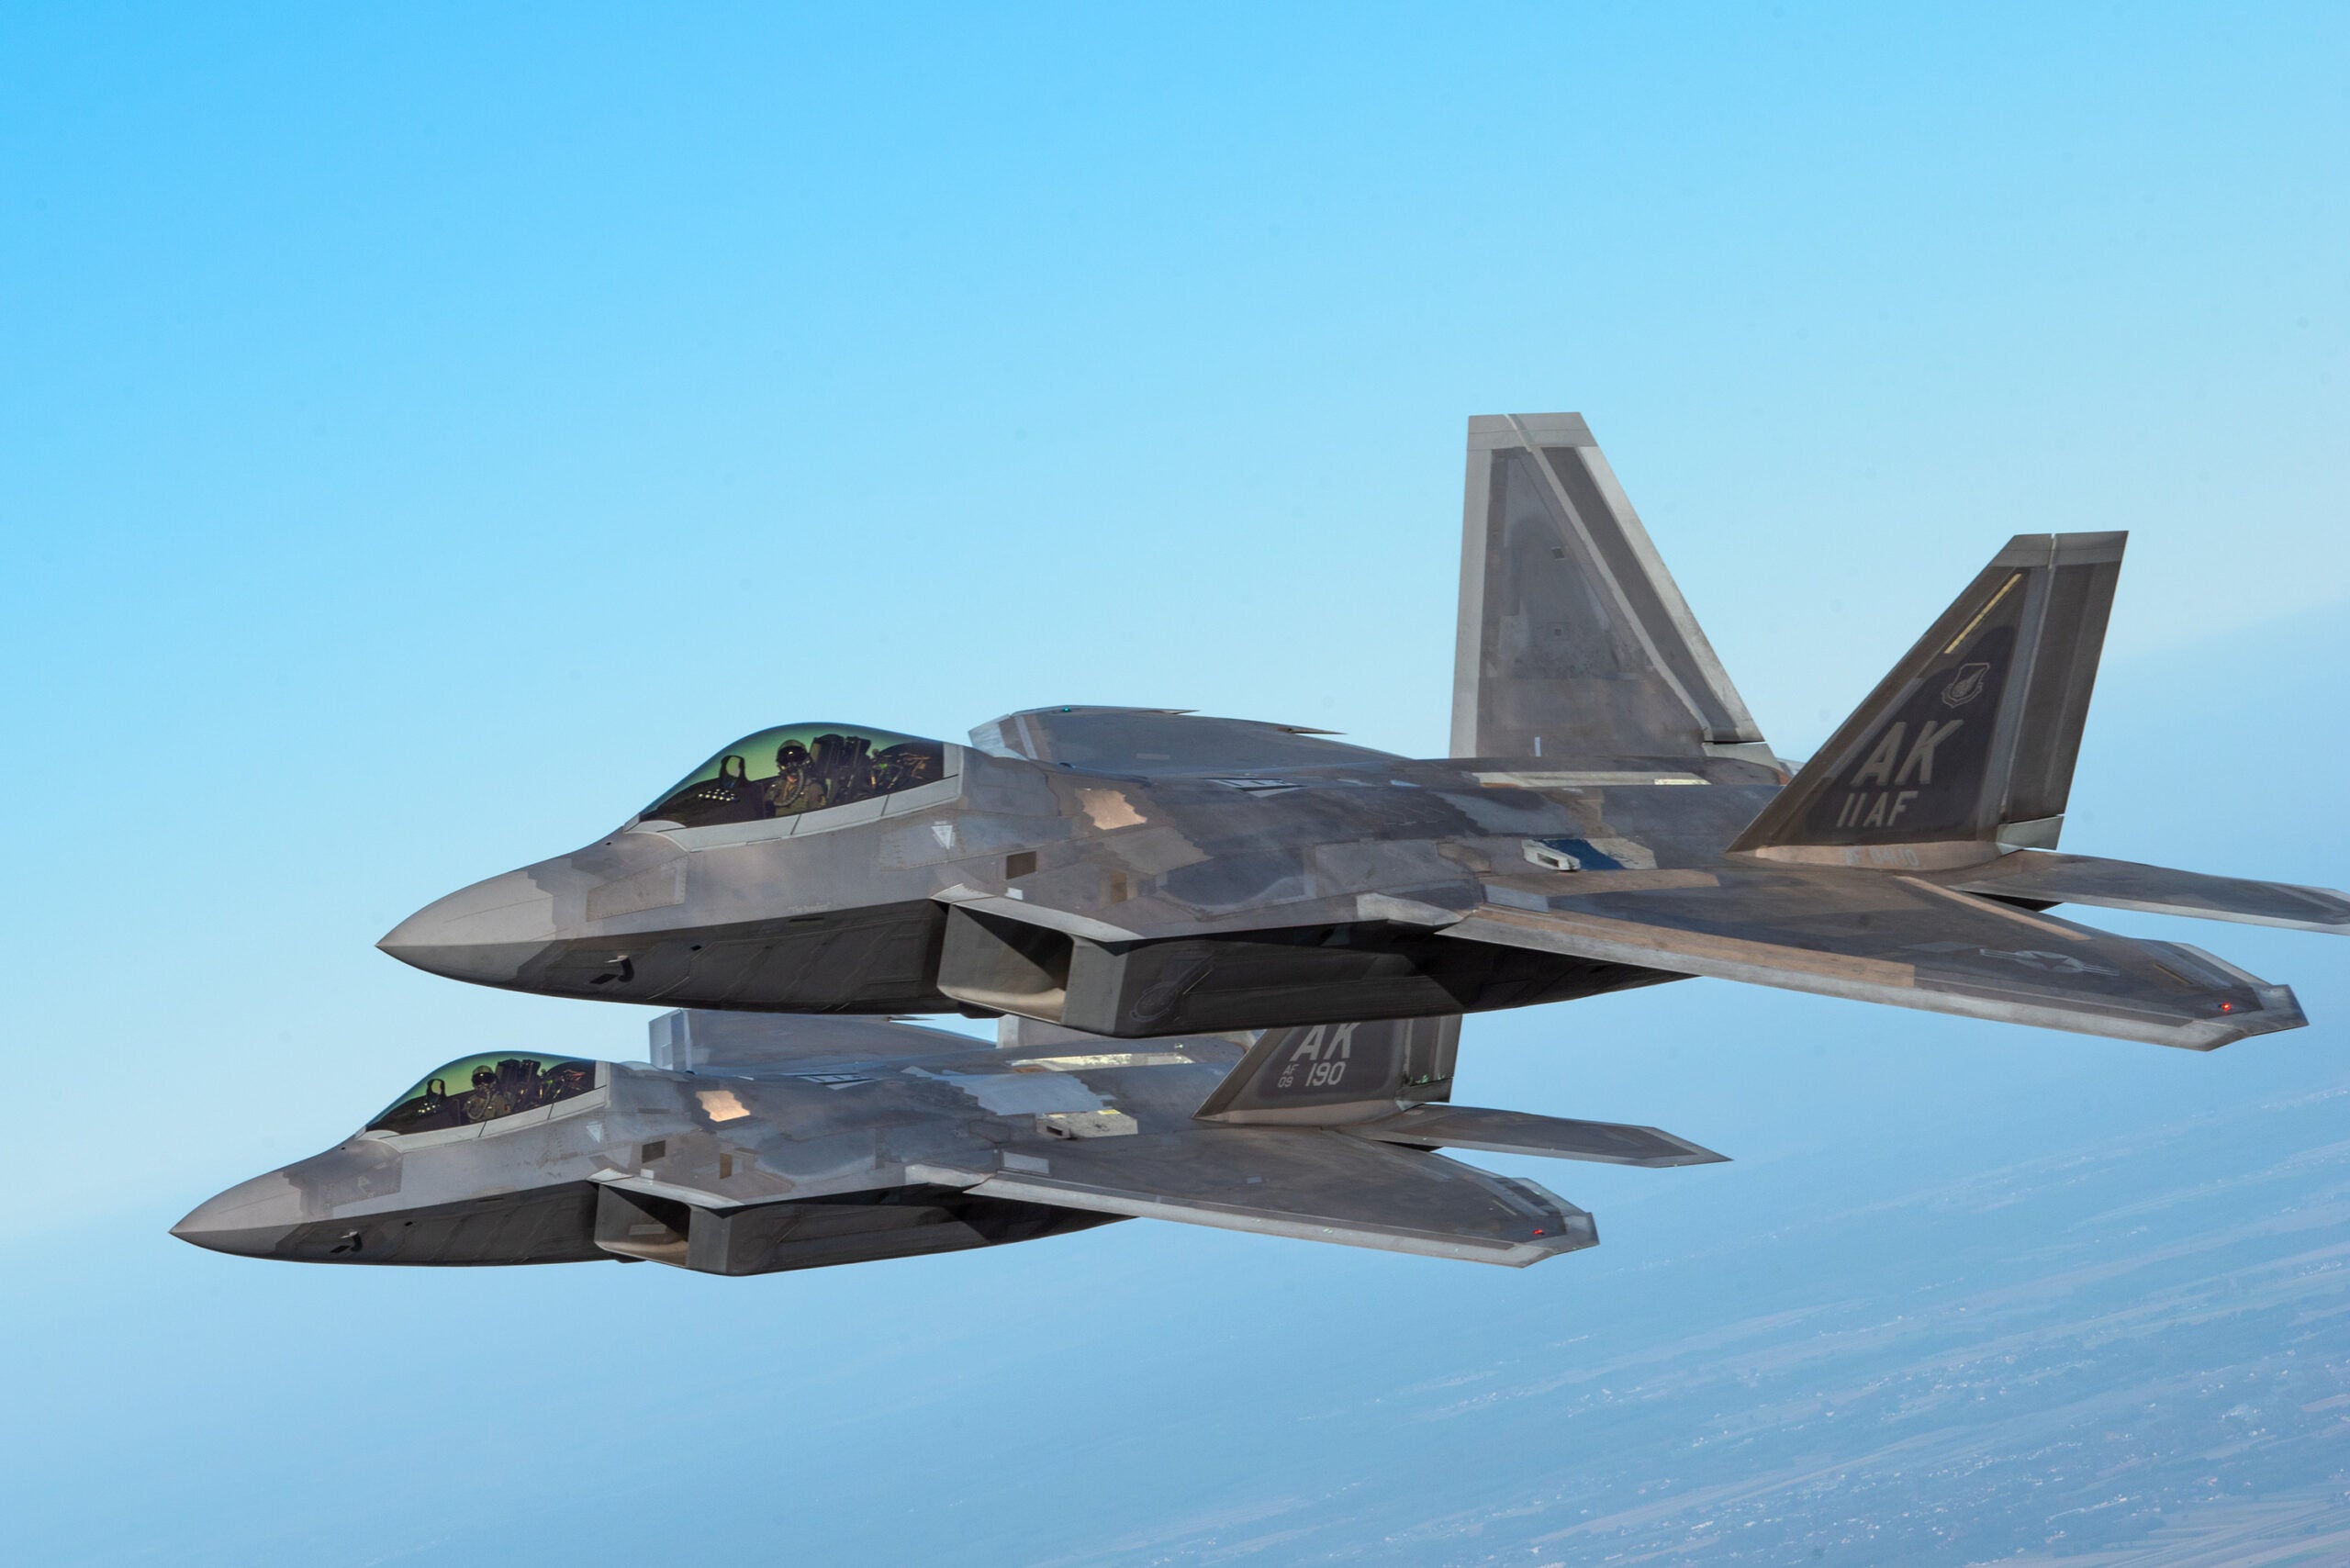 Two U.S. Air Force F-22 Raptors assigned to the 90th Expeditionary Fighter Squadron conduct a two-ship formation during the NATO Air Shielding media day, Oct. 12, 2022 at Łask Air Base, Poland. The Raptors uphold the Air Shielding mission alongside Polish F-16s and Italian Eurofighter Typhoons. The event showcased the importance of NATO’s Air Shielding mission and the interoperability among the U.S. and NATO Allies to international media through trilateral aerial demonstrations and interviews with service members. The U.S. remains dedicated to our security commitments with our NATO Alliance and postured to defend NATO territory. (U.S. Air Force photo by Staff Sergeant Danielle Sukhlall)